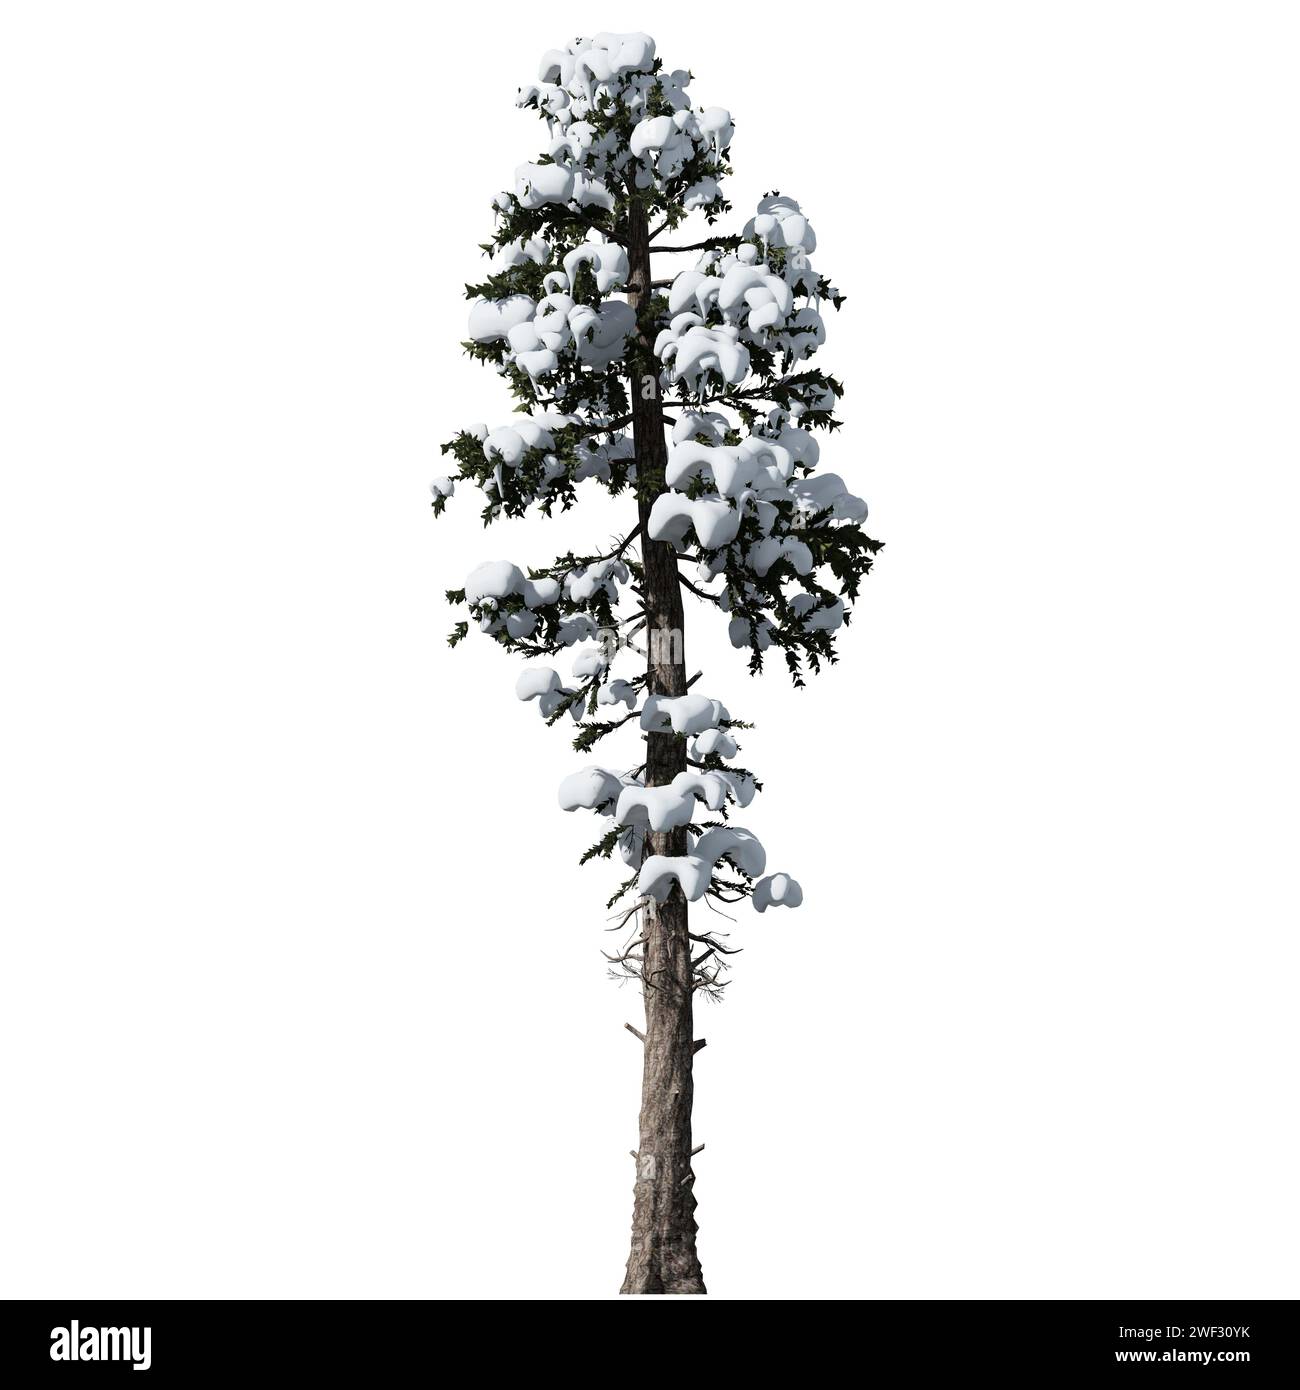 A Douglas Fir snow covered Tree front view isolated on white background Stock Photo